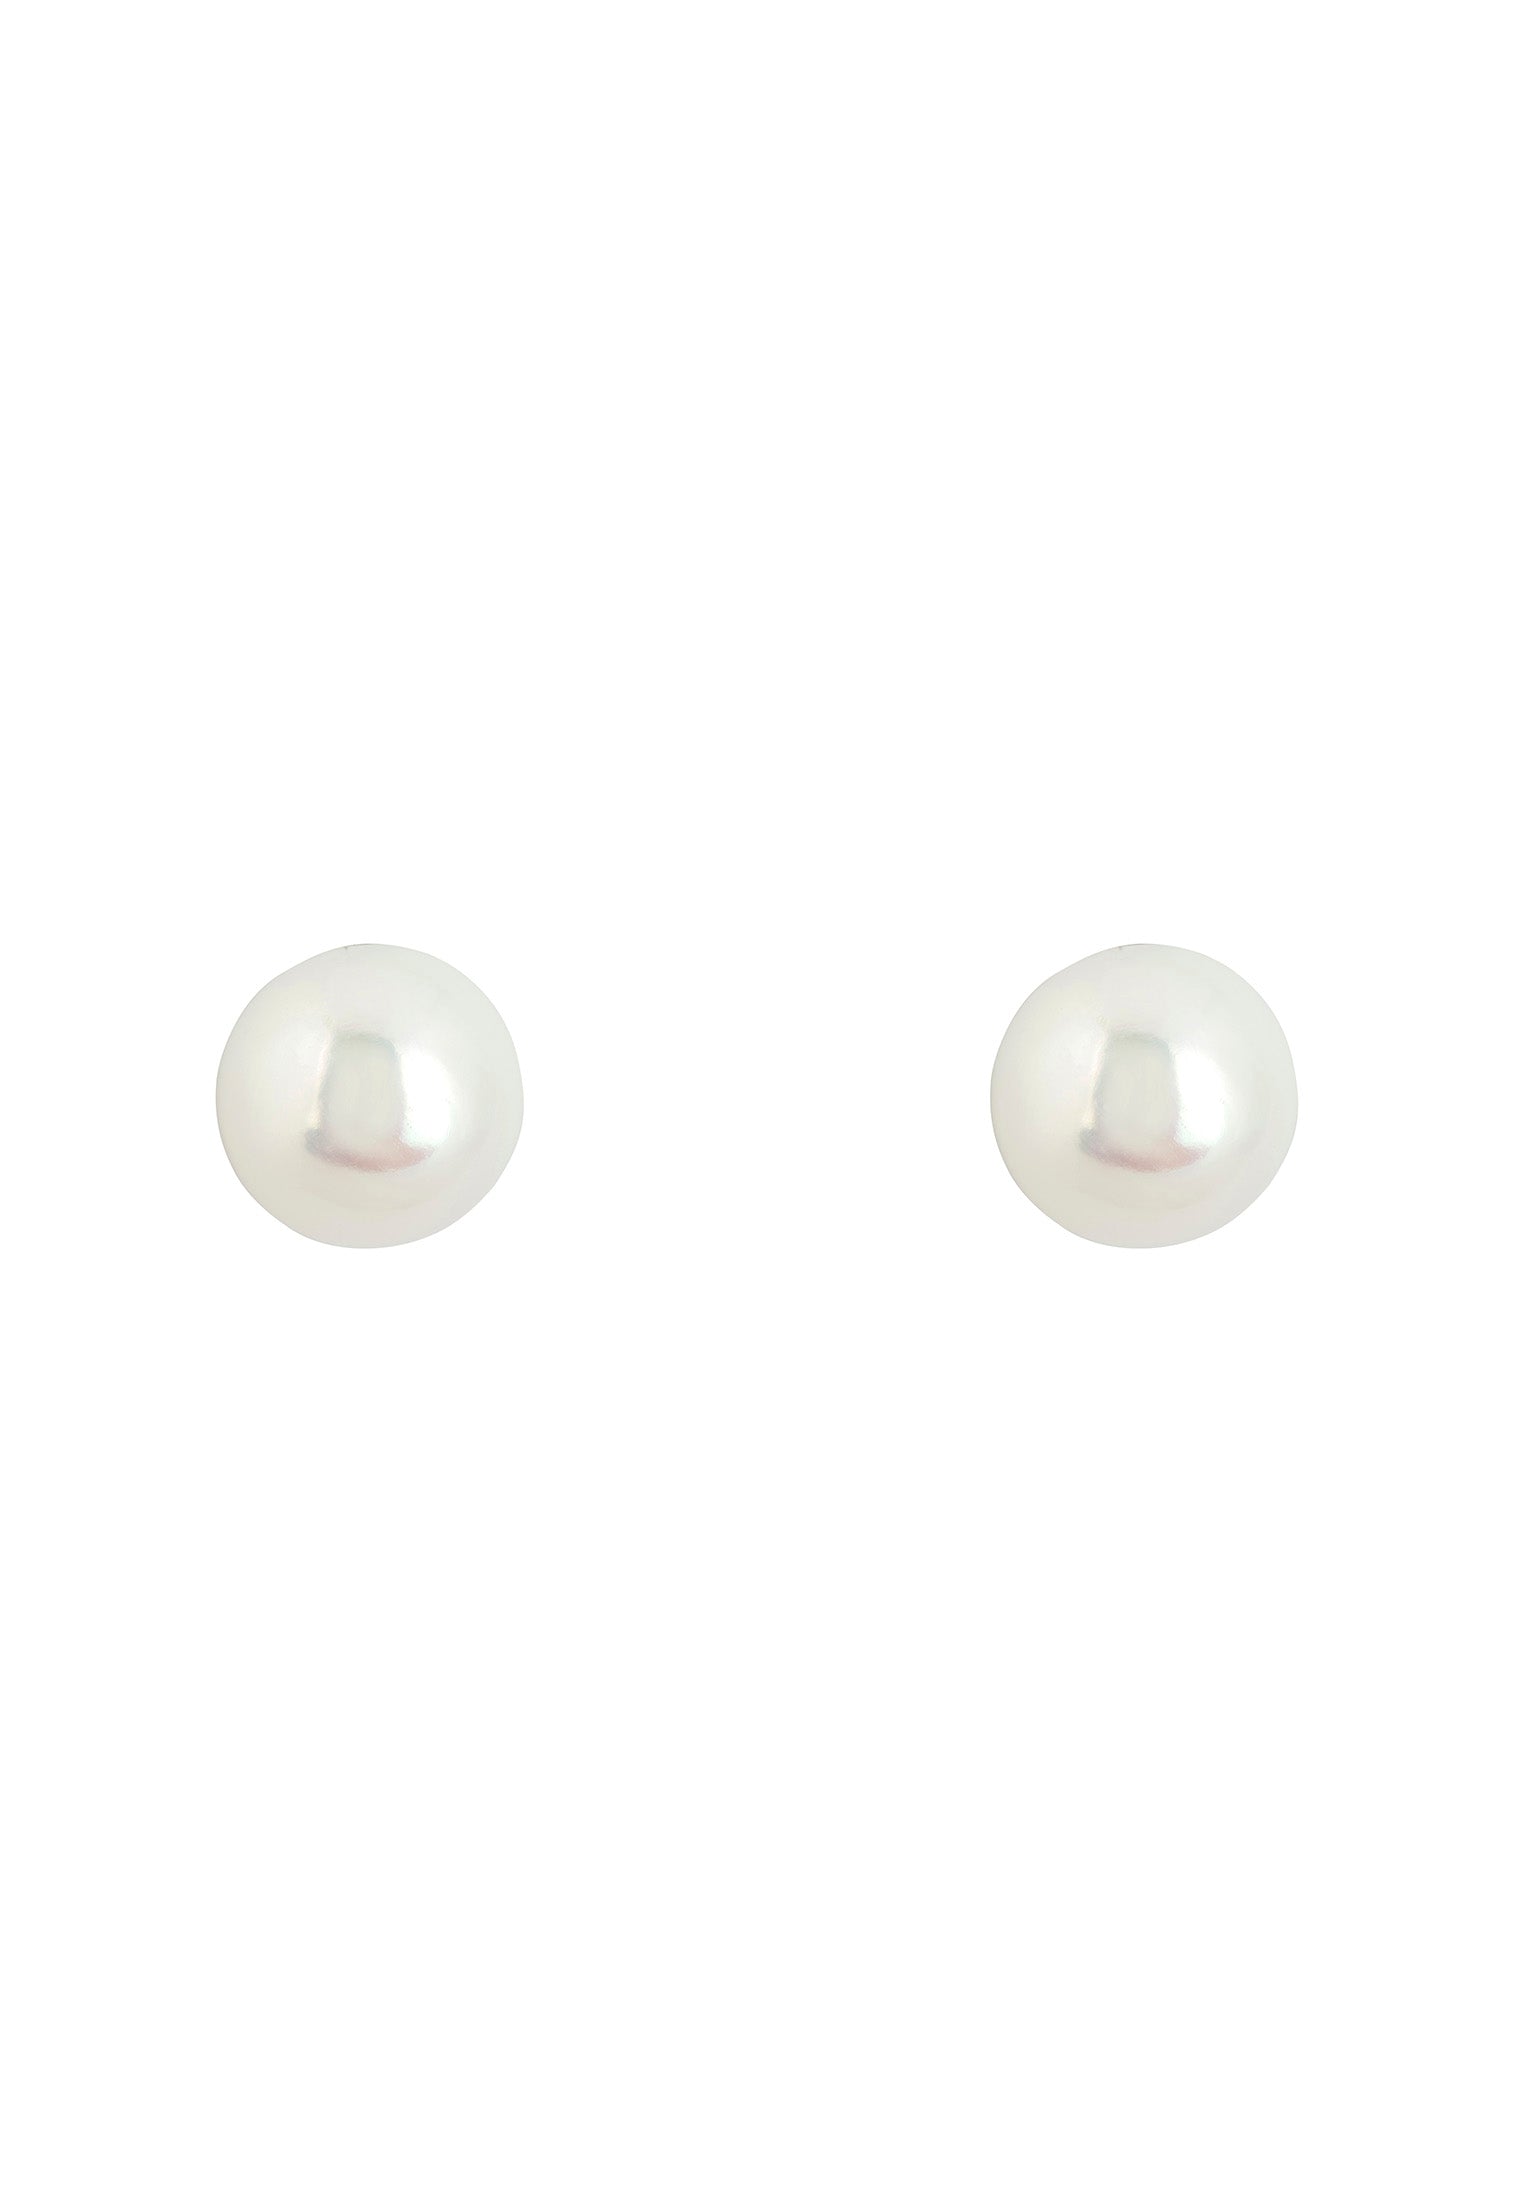 Solid 14K White Gold 8mm Classic Natural Pearl Stud Earrings